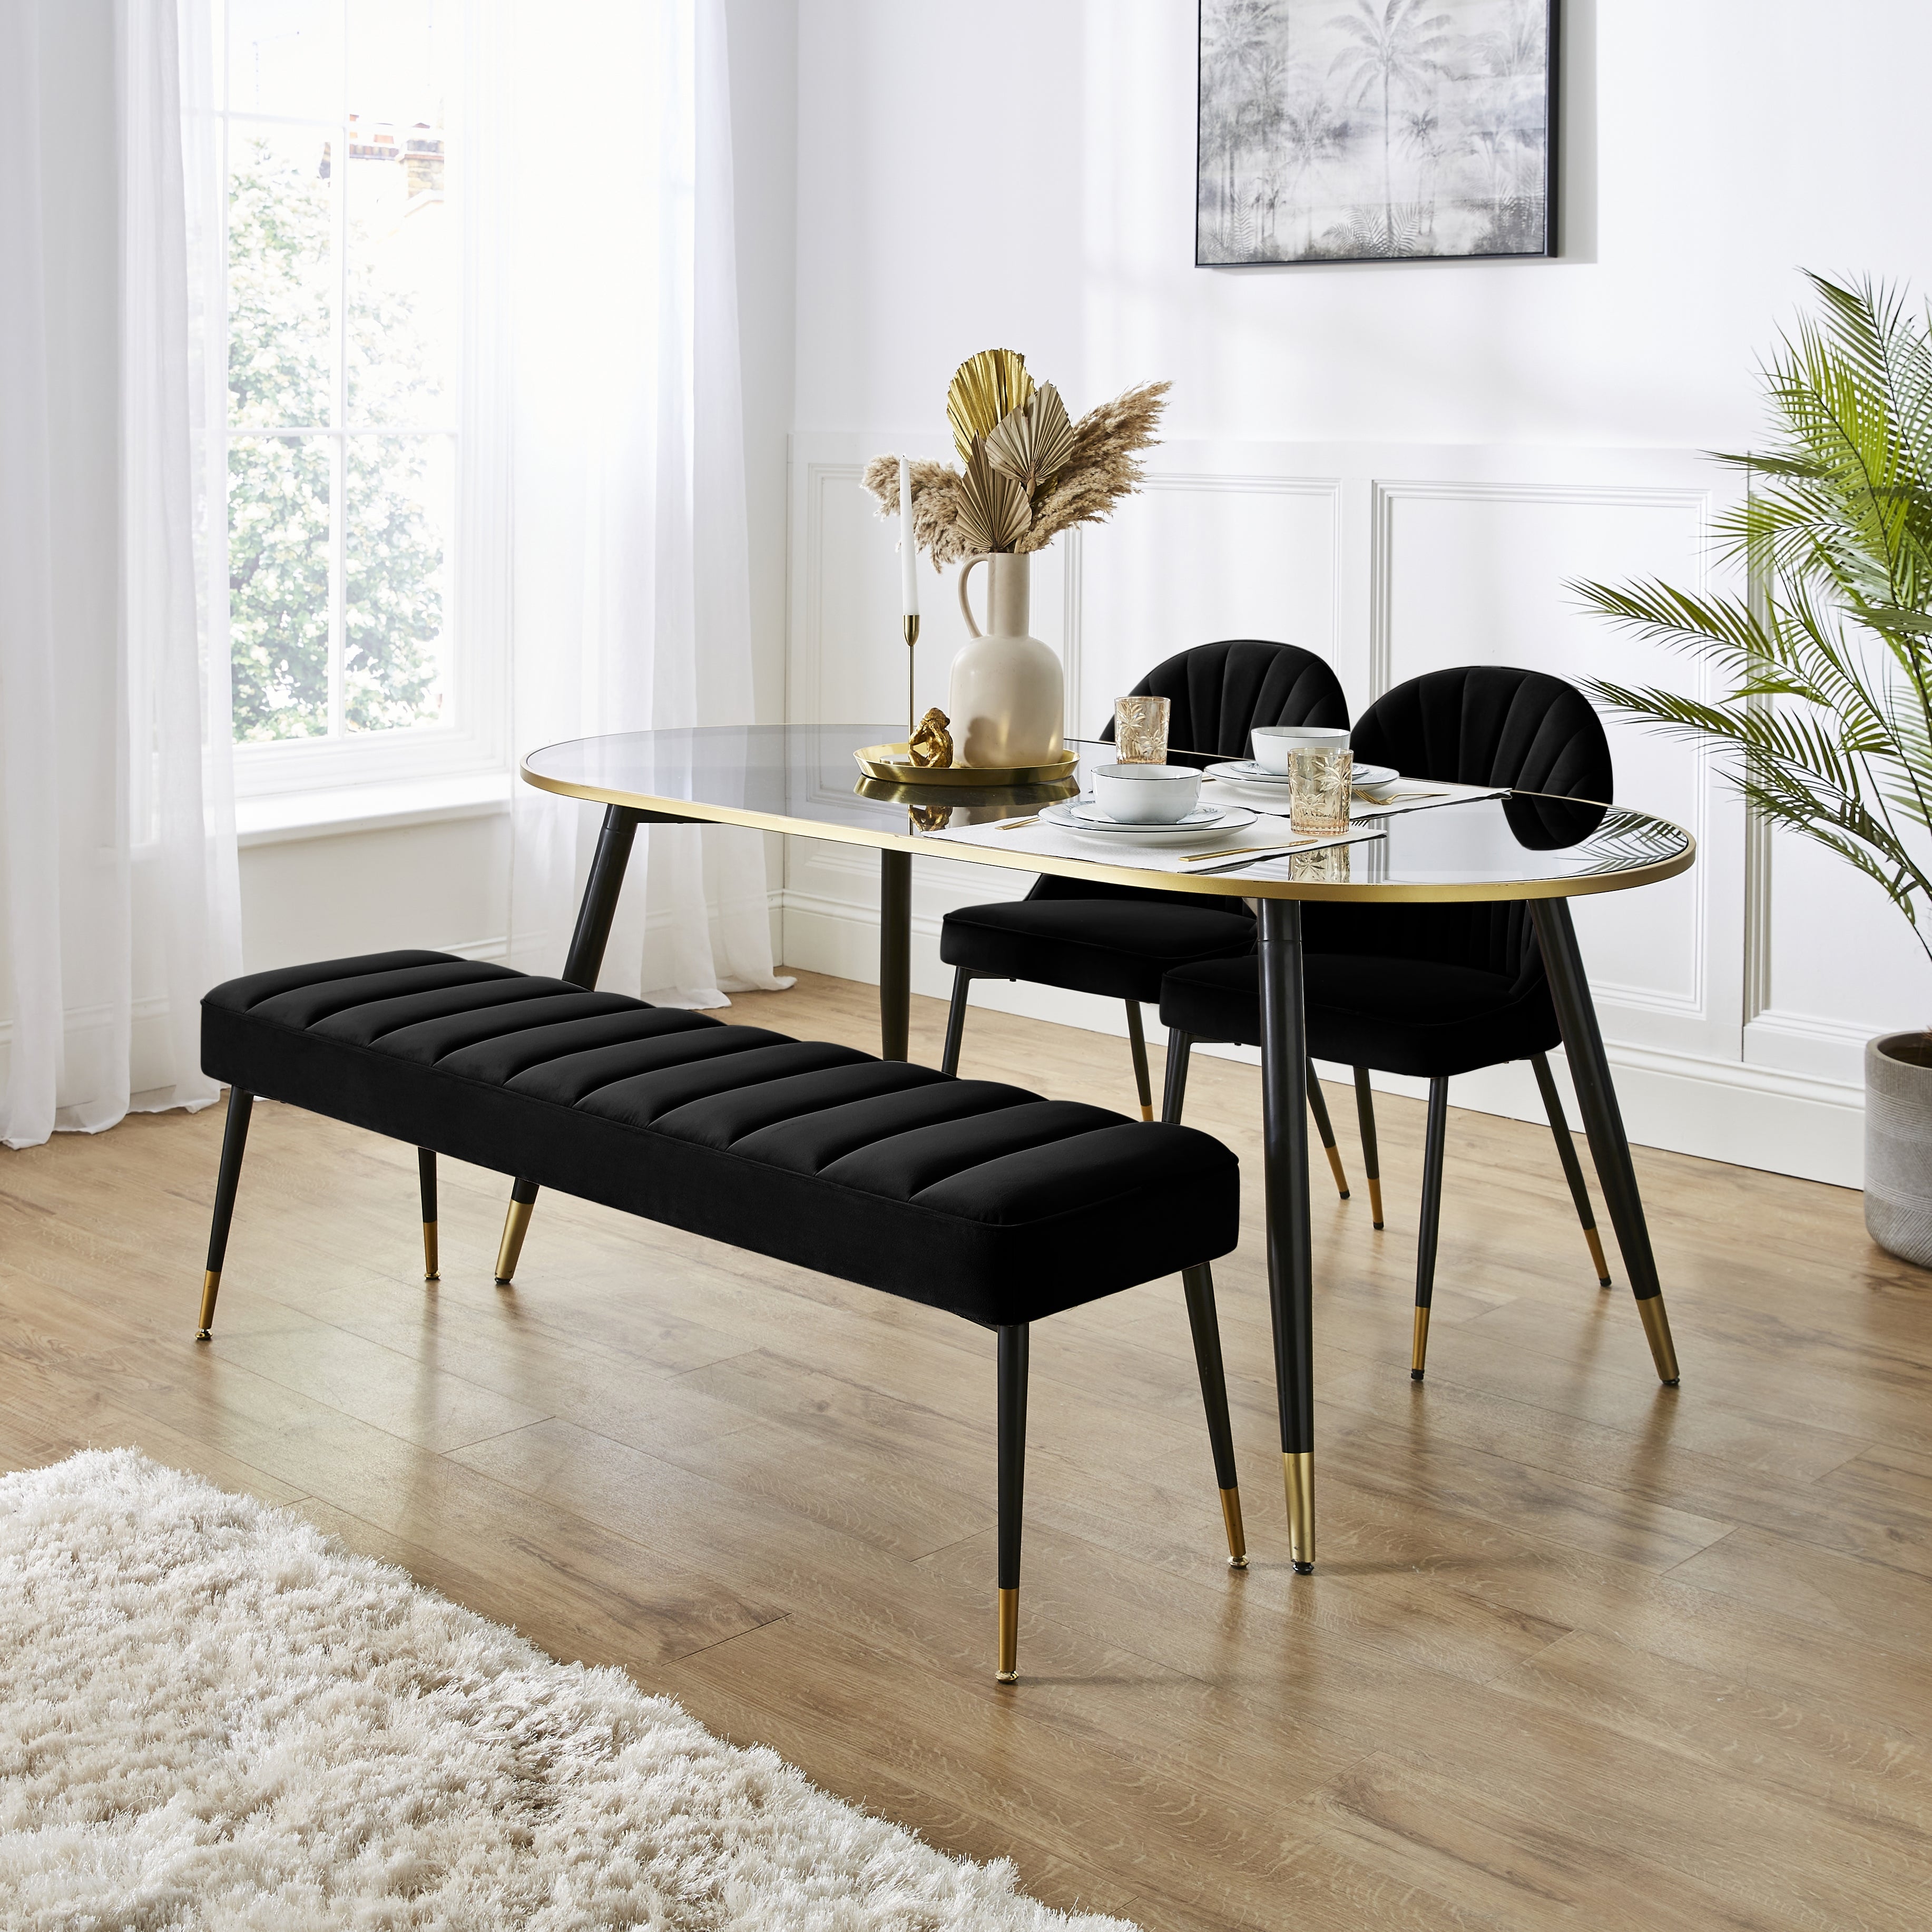 Sylvia Oval Dining Table With Sylvia Black Velvet Dining Bench Chairs